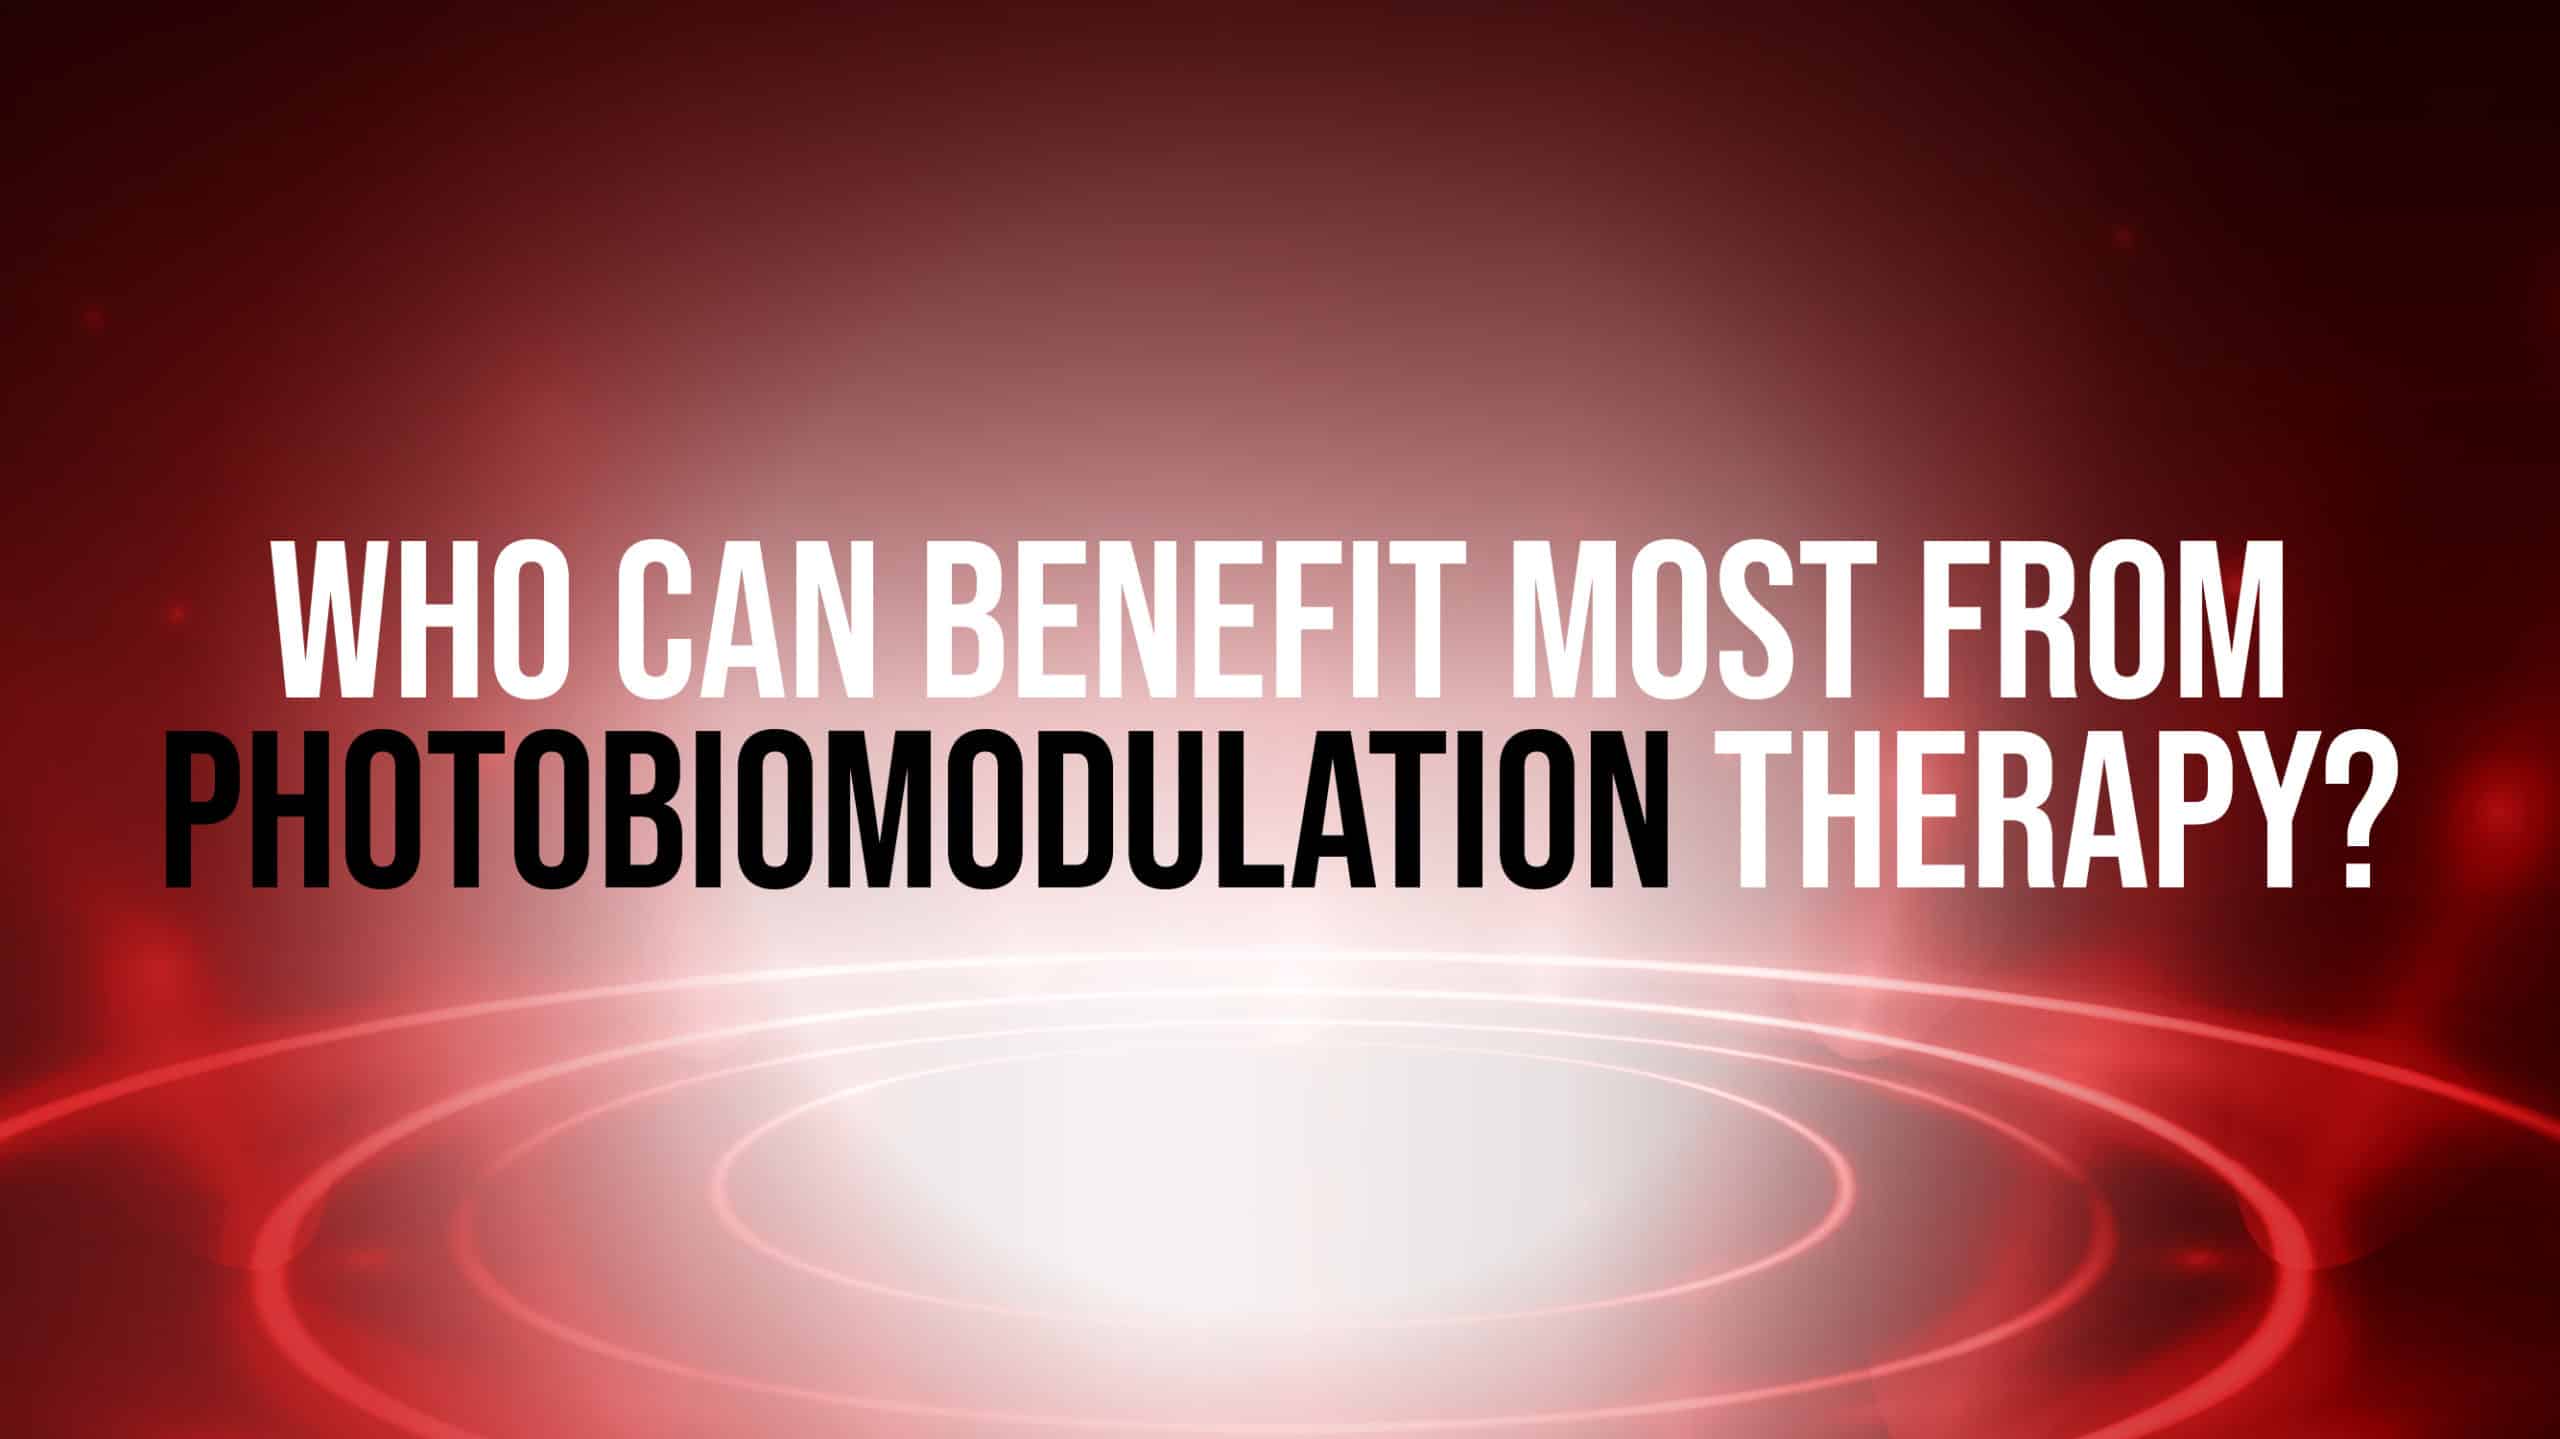 Who Can Benefit Most From Photobiomodulation Therapy?